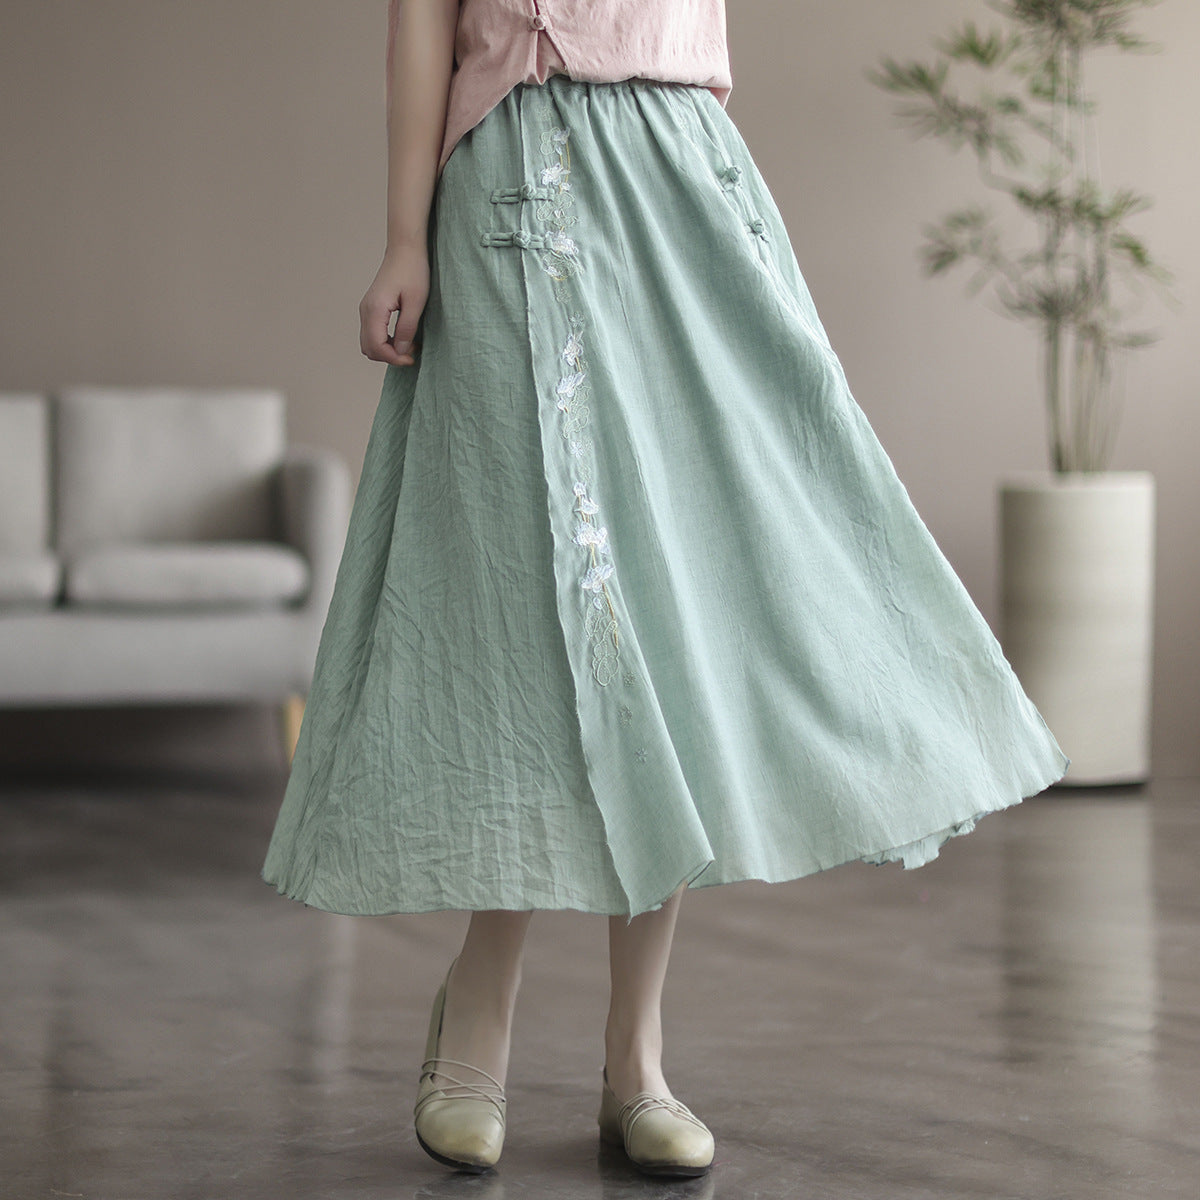 Retro Summer Cotton Linen Floral A-Line Skirt Apr 2022 New Arrival Green One Size 